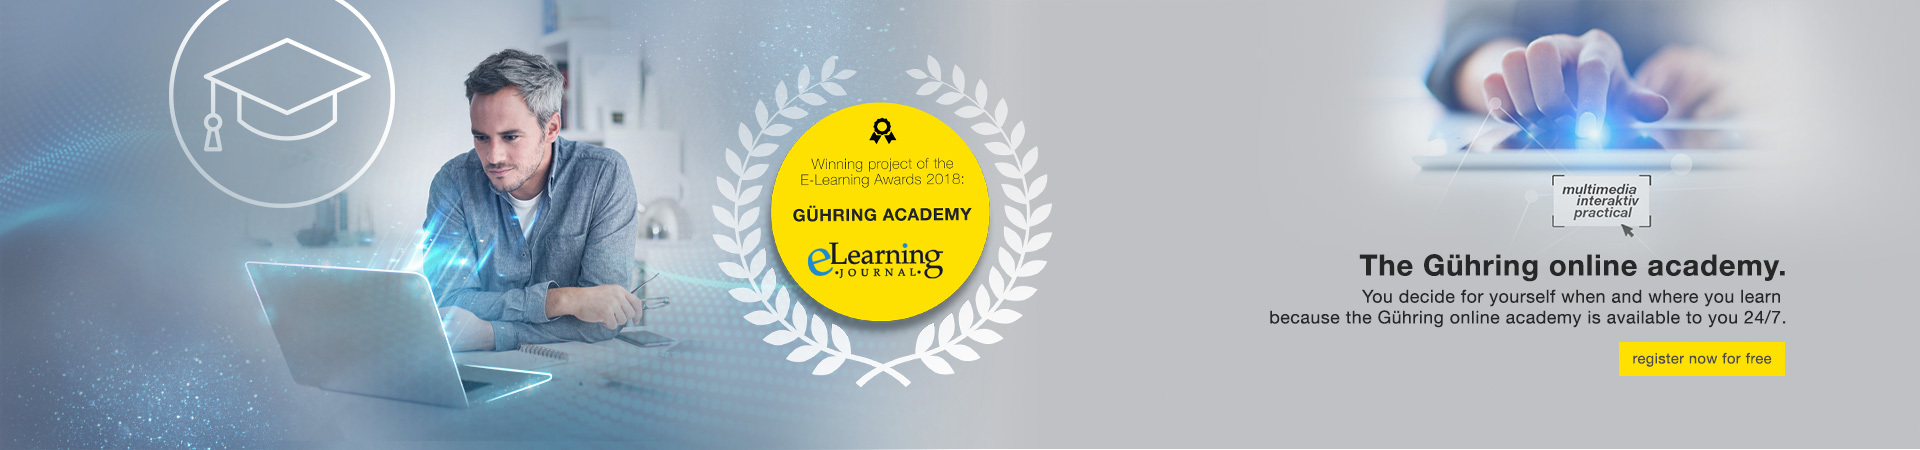 Gühring Academy - about milling cutters